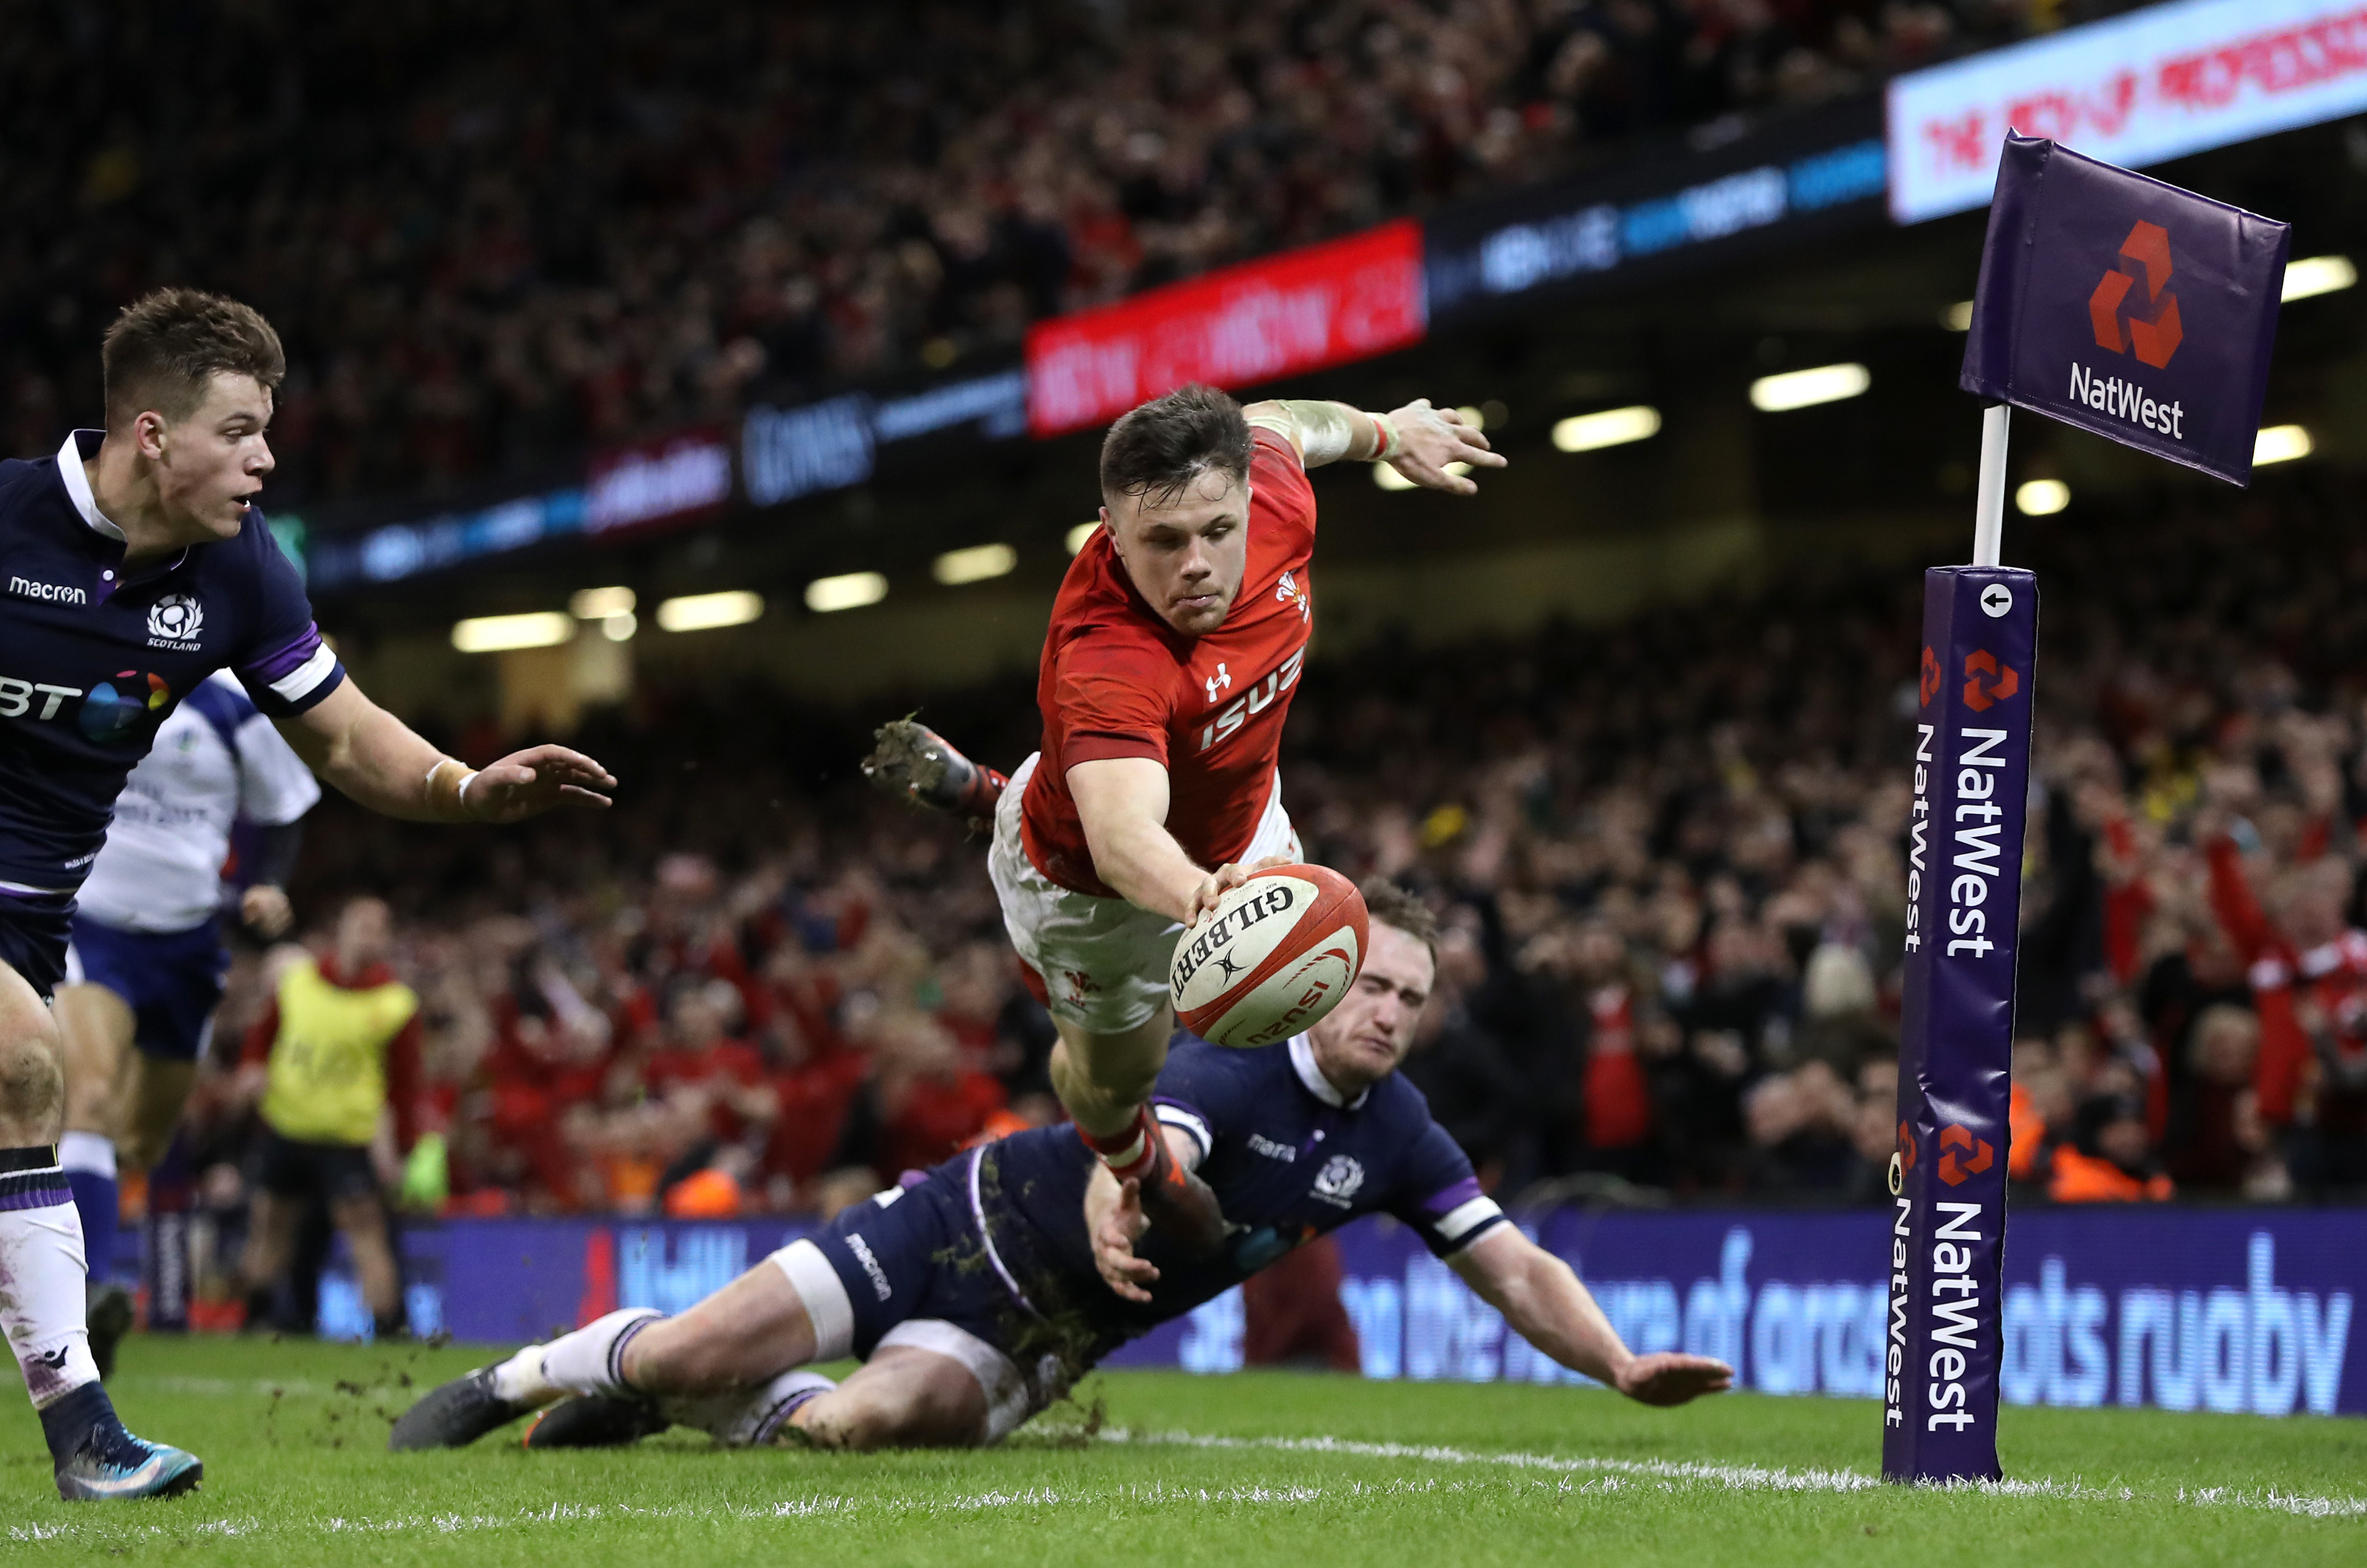 Steff Evans Scores Wales' fourth try in their 34-7 rout of Sxotland in Cardiff.